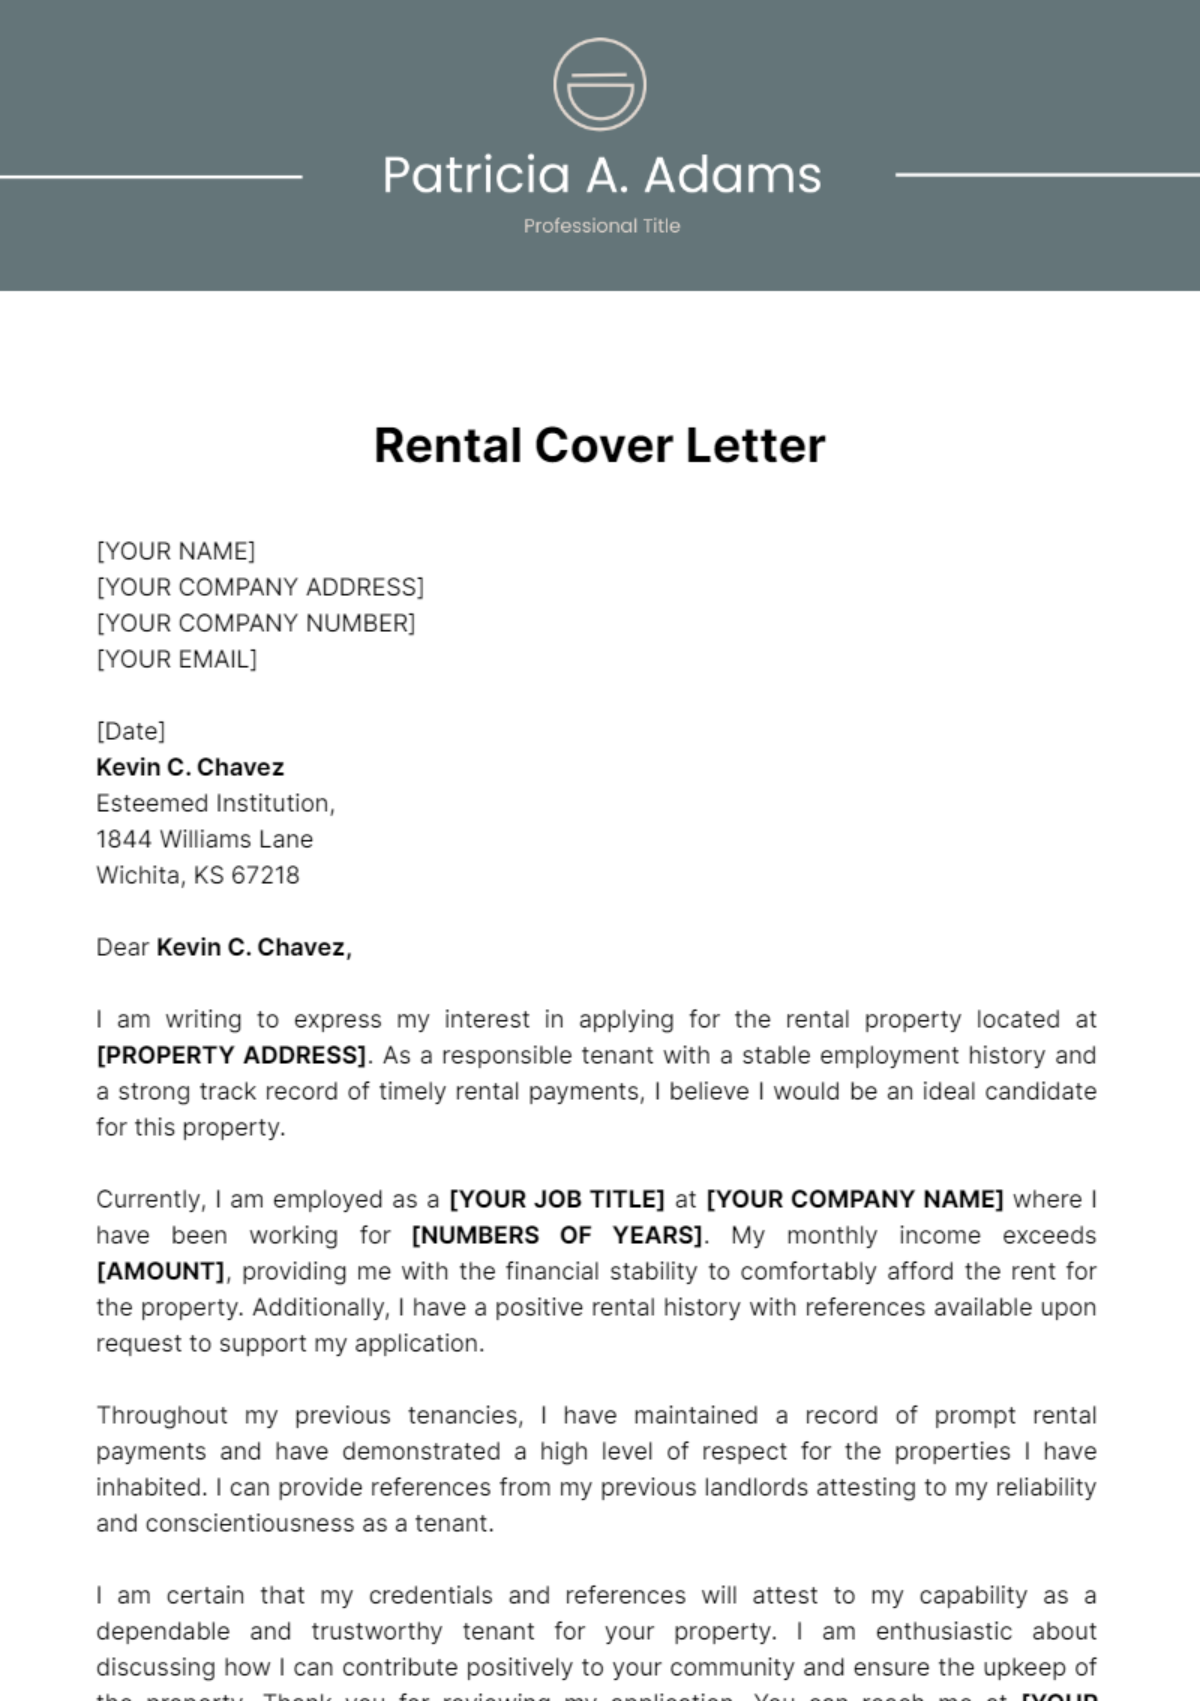 Rental Cover Letter Template